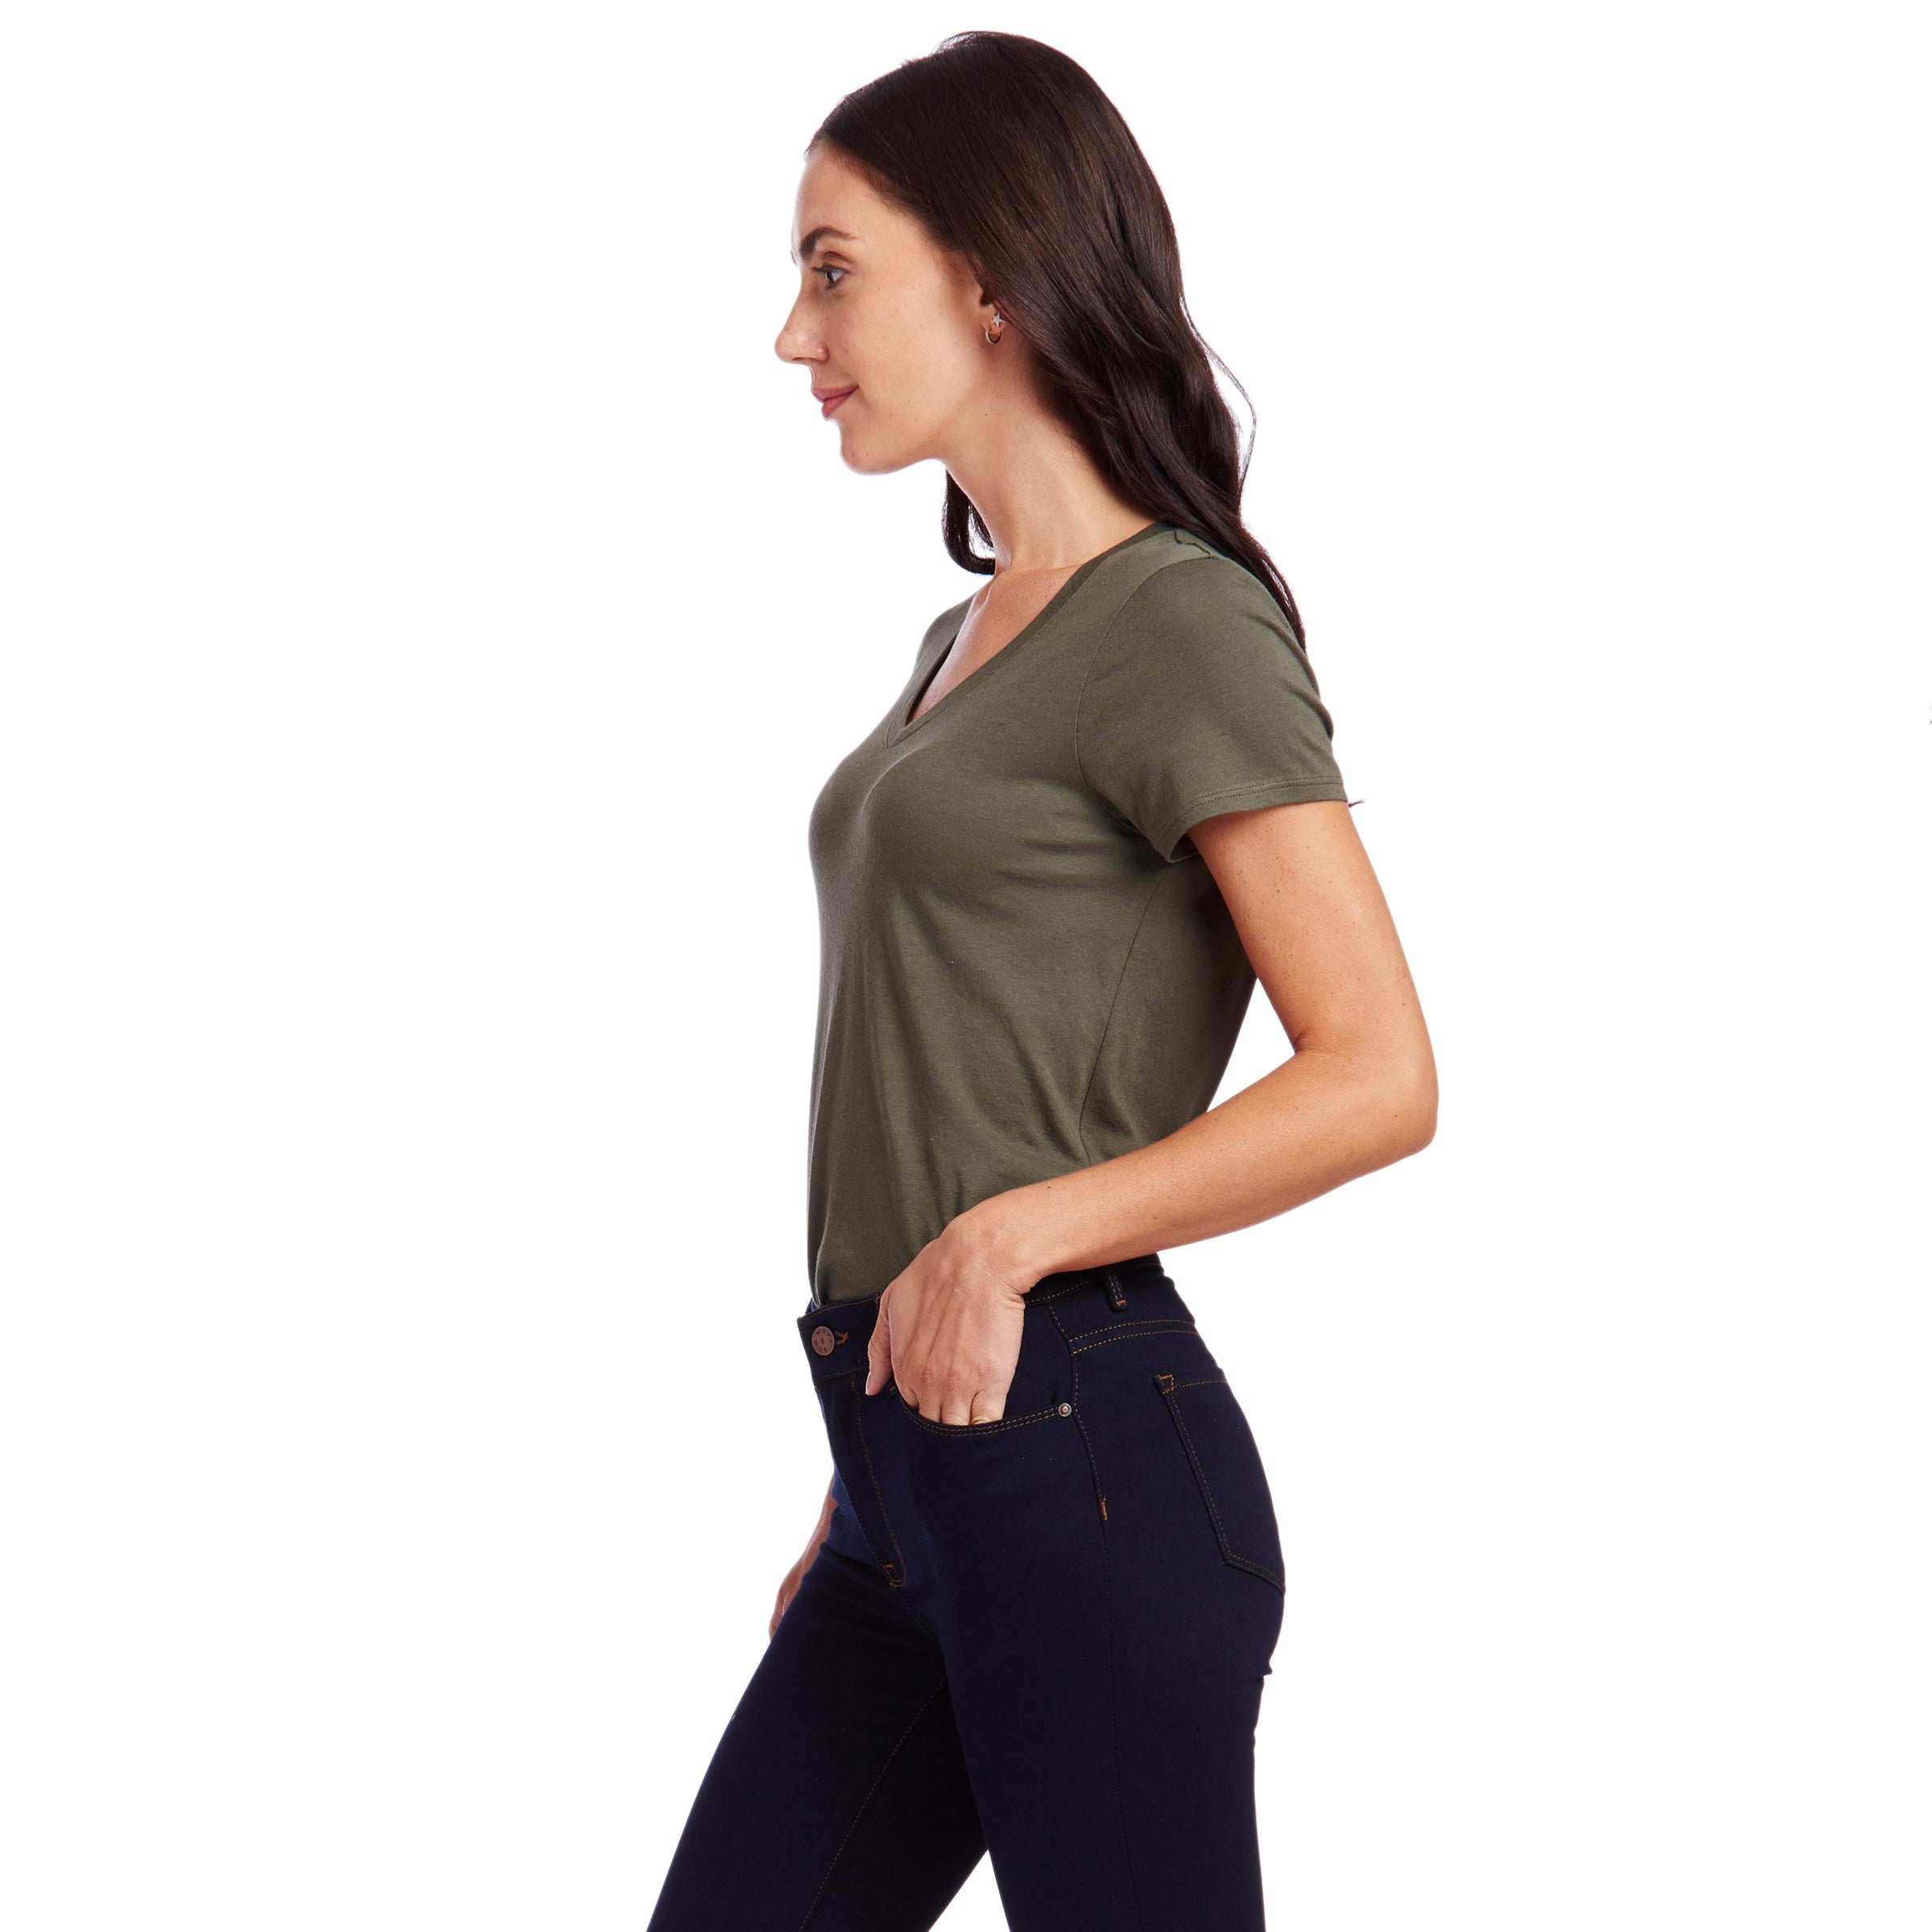 Women wearing Verde militar Fitted V-Neck Marcy Tee